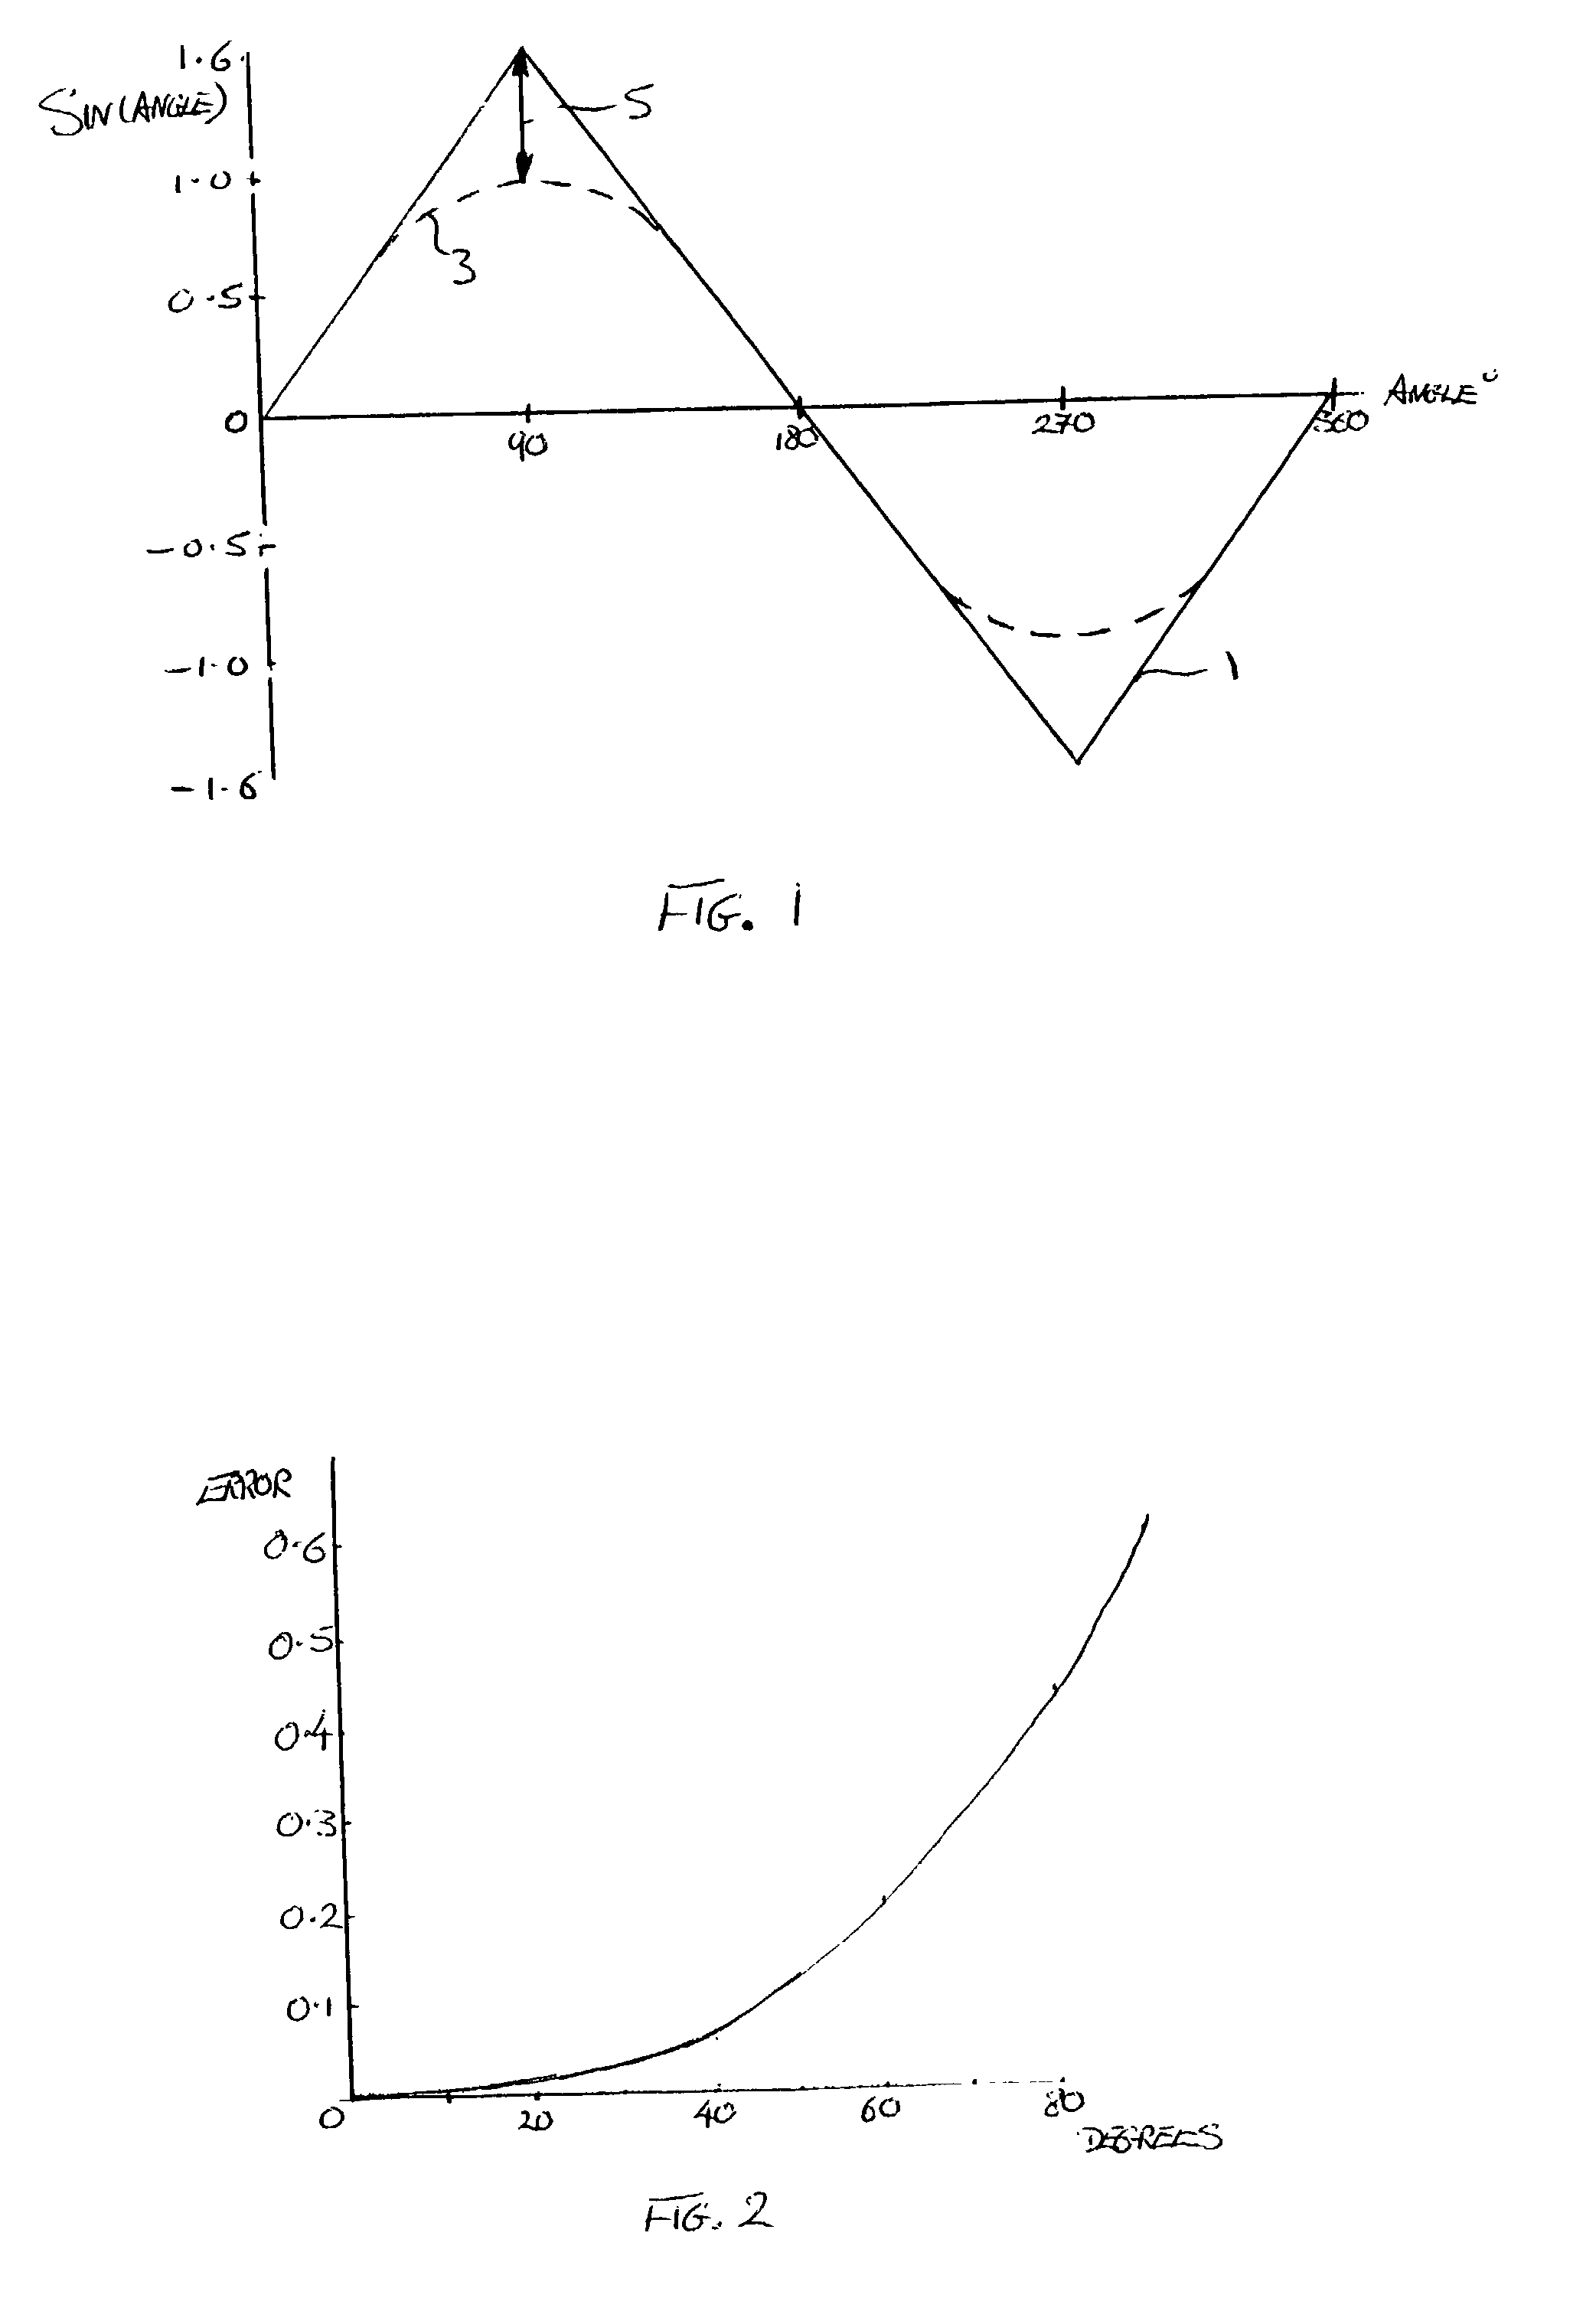 Sinusoid synthesis